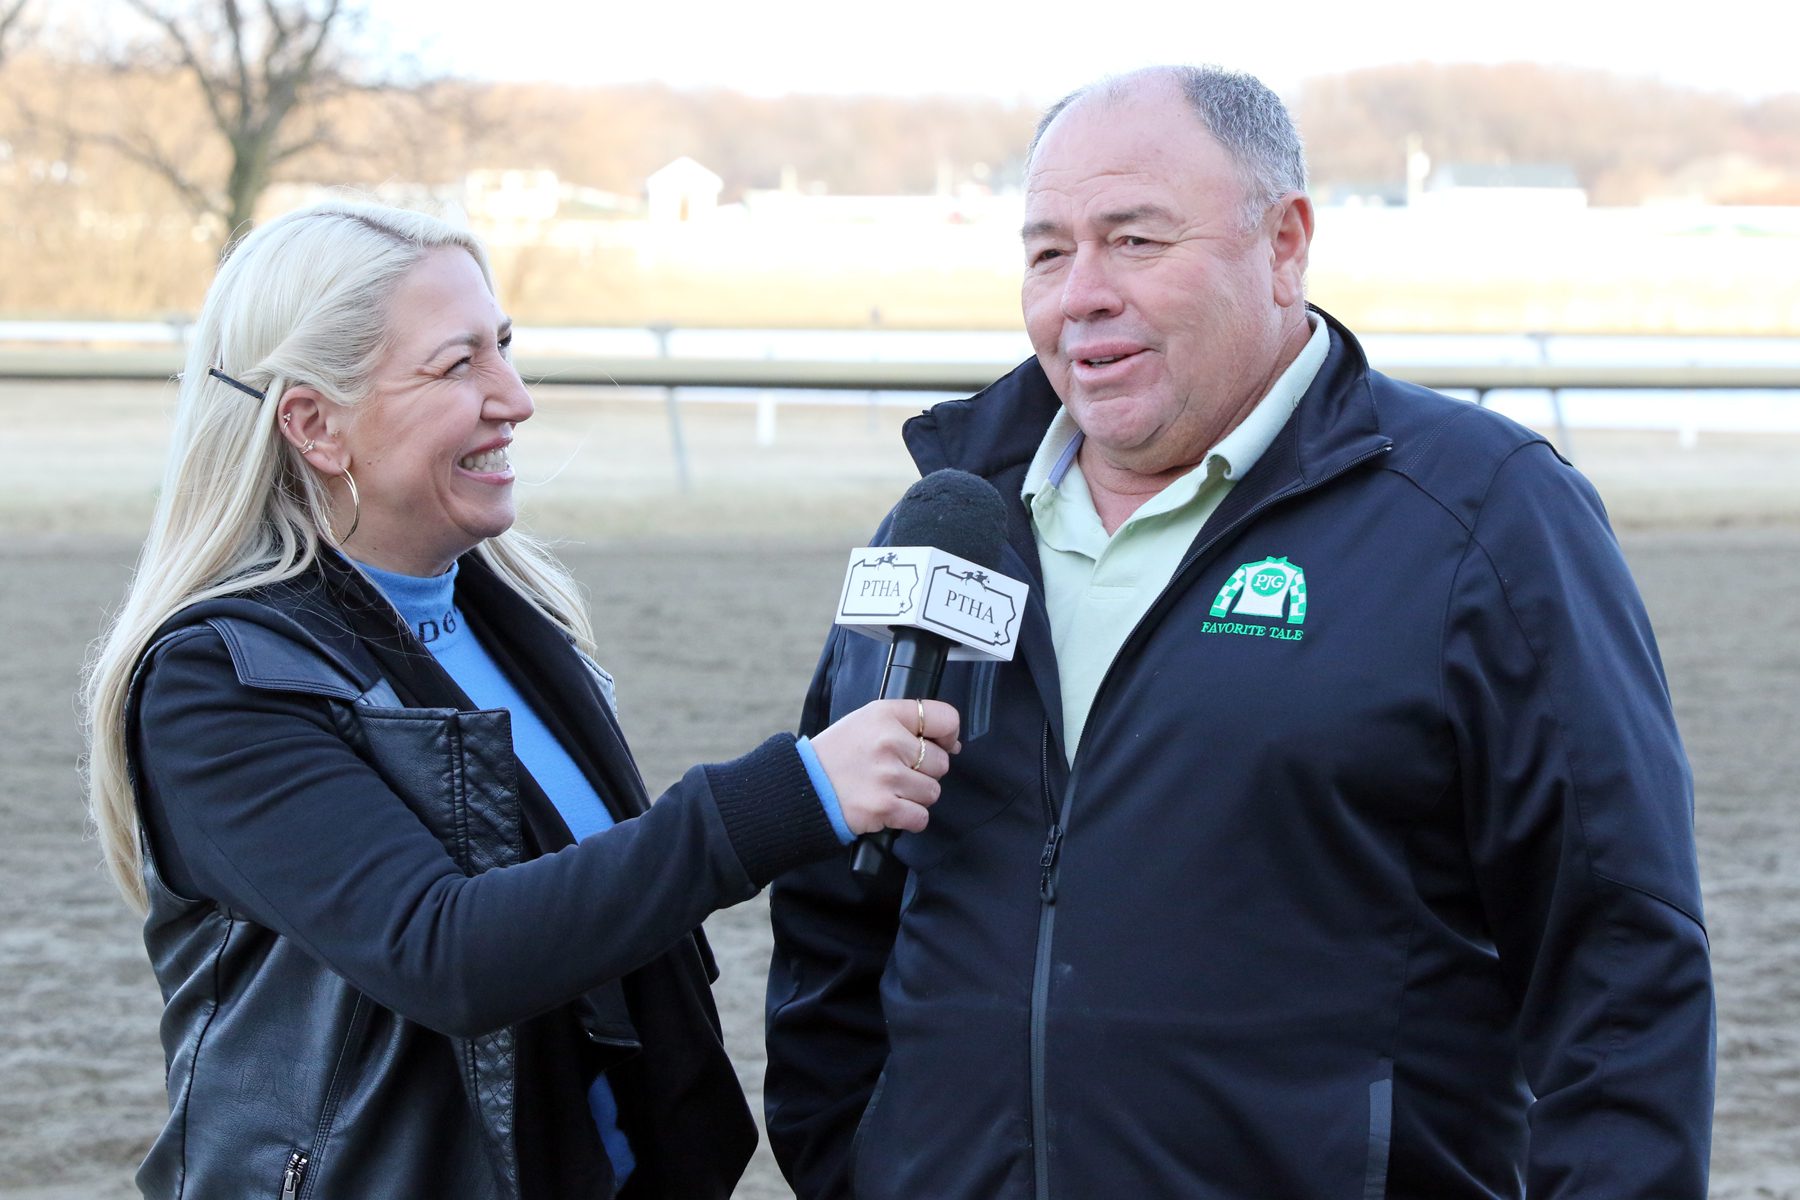 Dani Gibson with the PTHA interviews Guadalupe Preciado after Scaramouche wins The Rittenhouse Square at Parx on March 8, 2022. Photo By: Chad B. Harmon